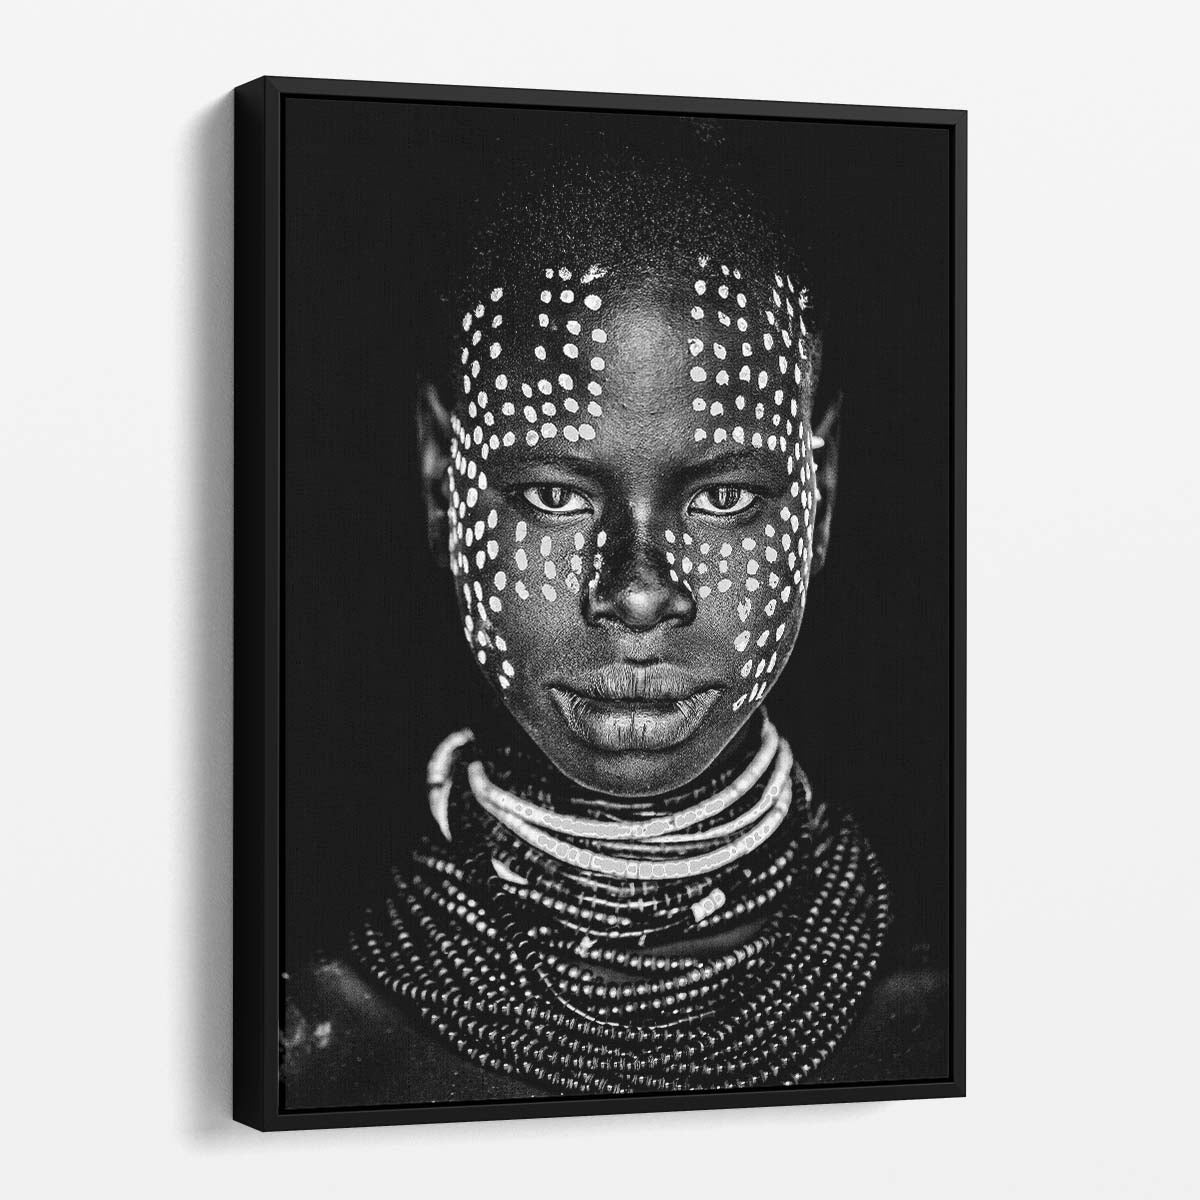 Ethiopian Karo Tribe Woman Portrait, Monochrome Documentary Photography by Luxuriance Designs, made in USA